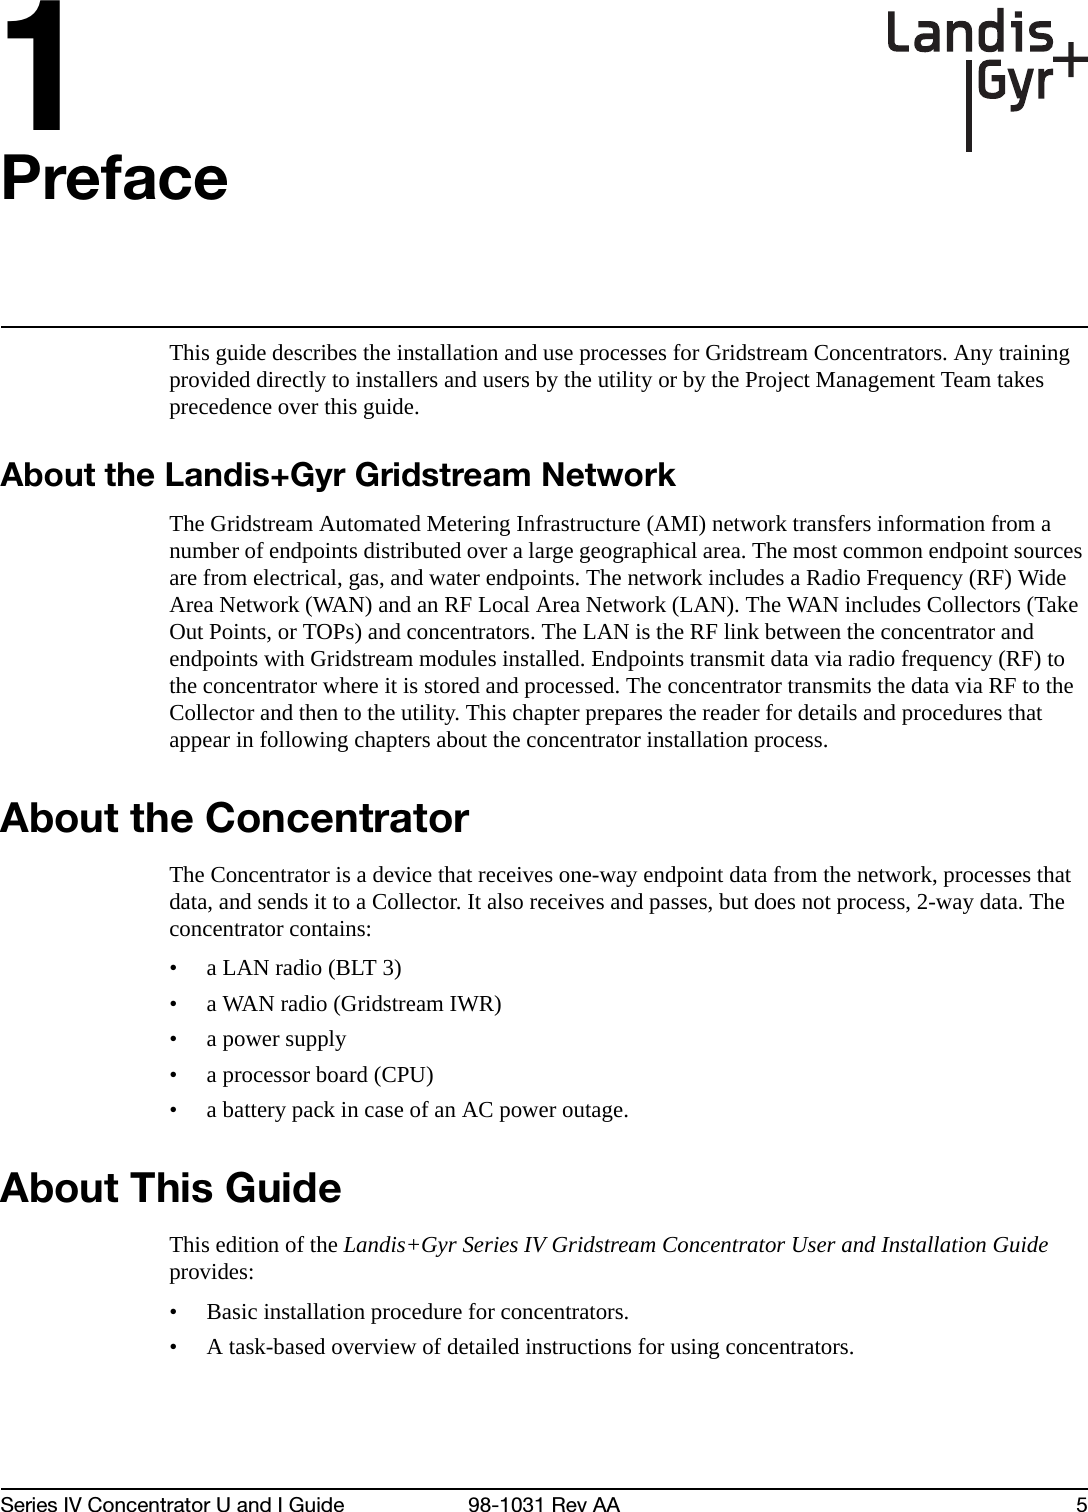 1Series IV Concentrator U and I Guide 98-1031 Rev AA 5PrefaceThis guide describes the installation and use processes for Gridstream Concentrators. Any training provided directly to installers and users by the utility or by the Project Management Team takes precedence over this guide.About the Landis+Gyr Gridstream NetworkThe Gridstream Automated Metering Infrastructure (AMI) network transfers information from a number of endpoints distributed over a large geographical area. The most common endpoint sources are from electrical, gas, and water endpoints. The network includes a Radio Frequency (RF) Wide Area Network (WAN) and an RF Local Area Network (LAN). The WAN includes Collectors (Take Out Points, or TOPs) and concentrators. The LAN is the RF link between the concentrator and endpoints with Gridstream modules installed. Endpoints transmit data via radio frequency (RF) to the concentrator where it is stored and processed. The concentrator transmits the data via RF to the Collector and then to the utility. This chapter prepares the reader for details and procedures that appear in following chapters about the concentrator installation process.About the ConcentratorThe Concentrator is a device that receives one-way endpoint data from the network, processes that data, and sends it to a Collector. It also receives and passes, but does not process, 2-way data. The concentrator contains:• a LAN radio (BLT 3) • a WAN radio (Gridstream IWR) •a power supply • a processor board (CPU) • a battery pack in case of an AC power outage. About This GuideThis edition of the Landis+Gyr Series IV Gridstream Concentrator User and Installation Guide provides: • Basic installation procedure for concentrators.• A task-based overview of detailed instructions for using concentrators. 